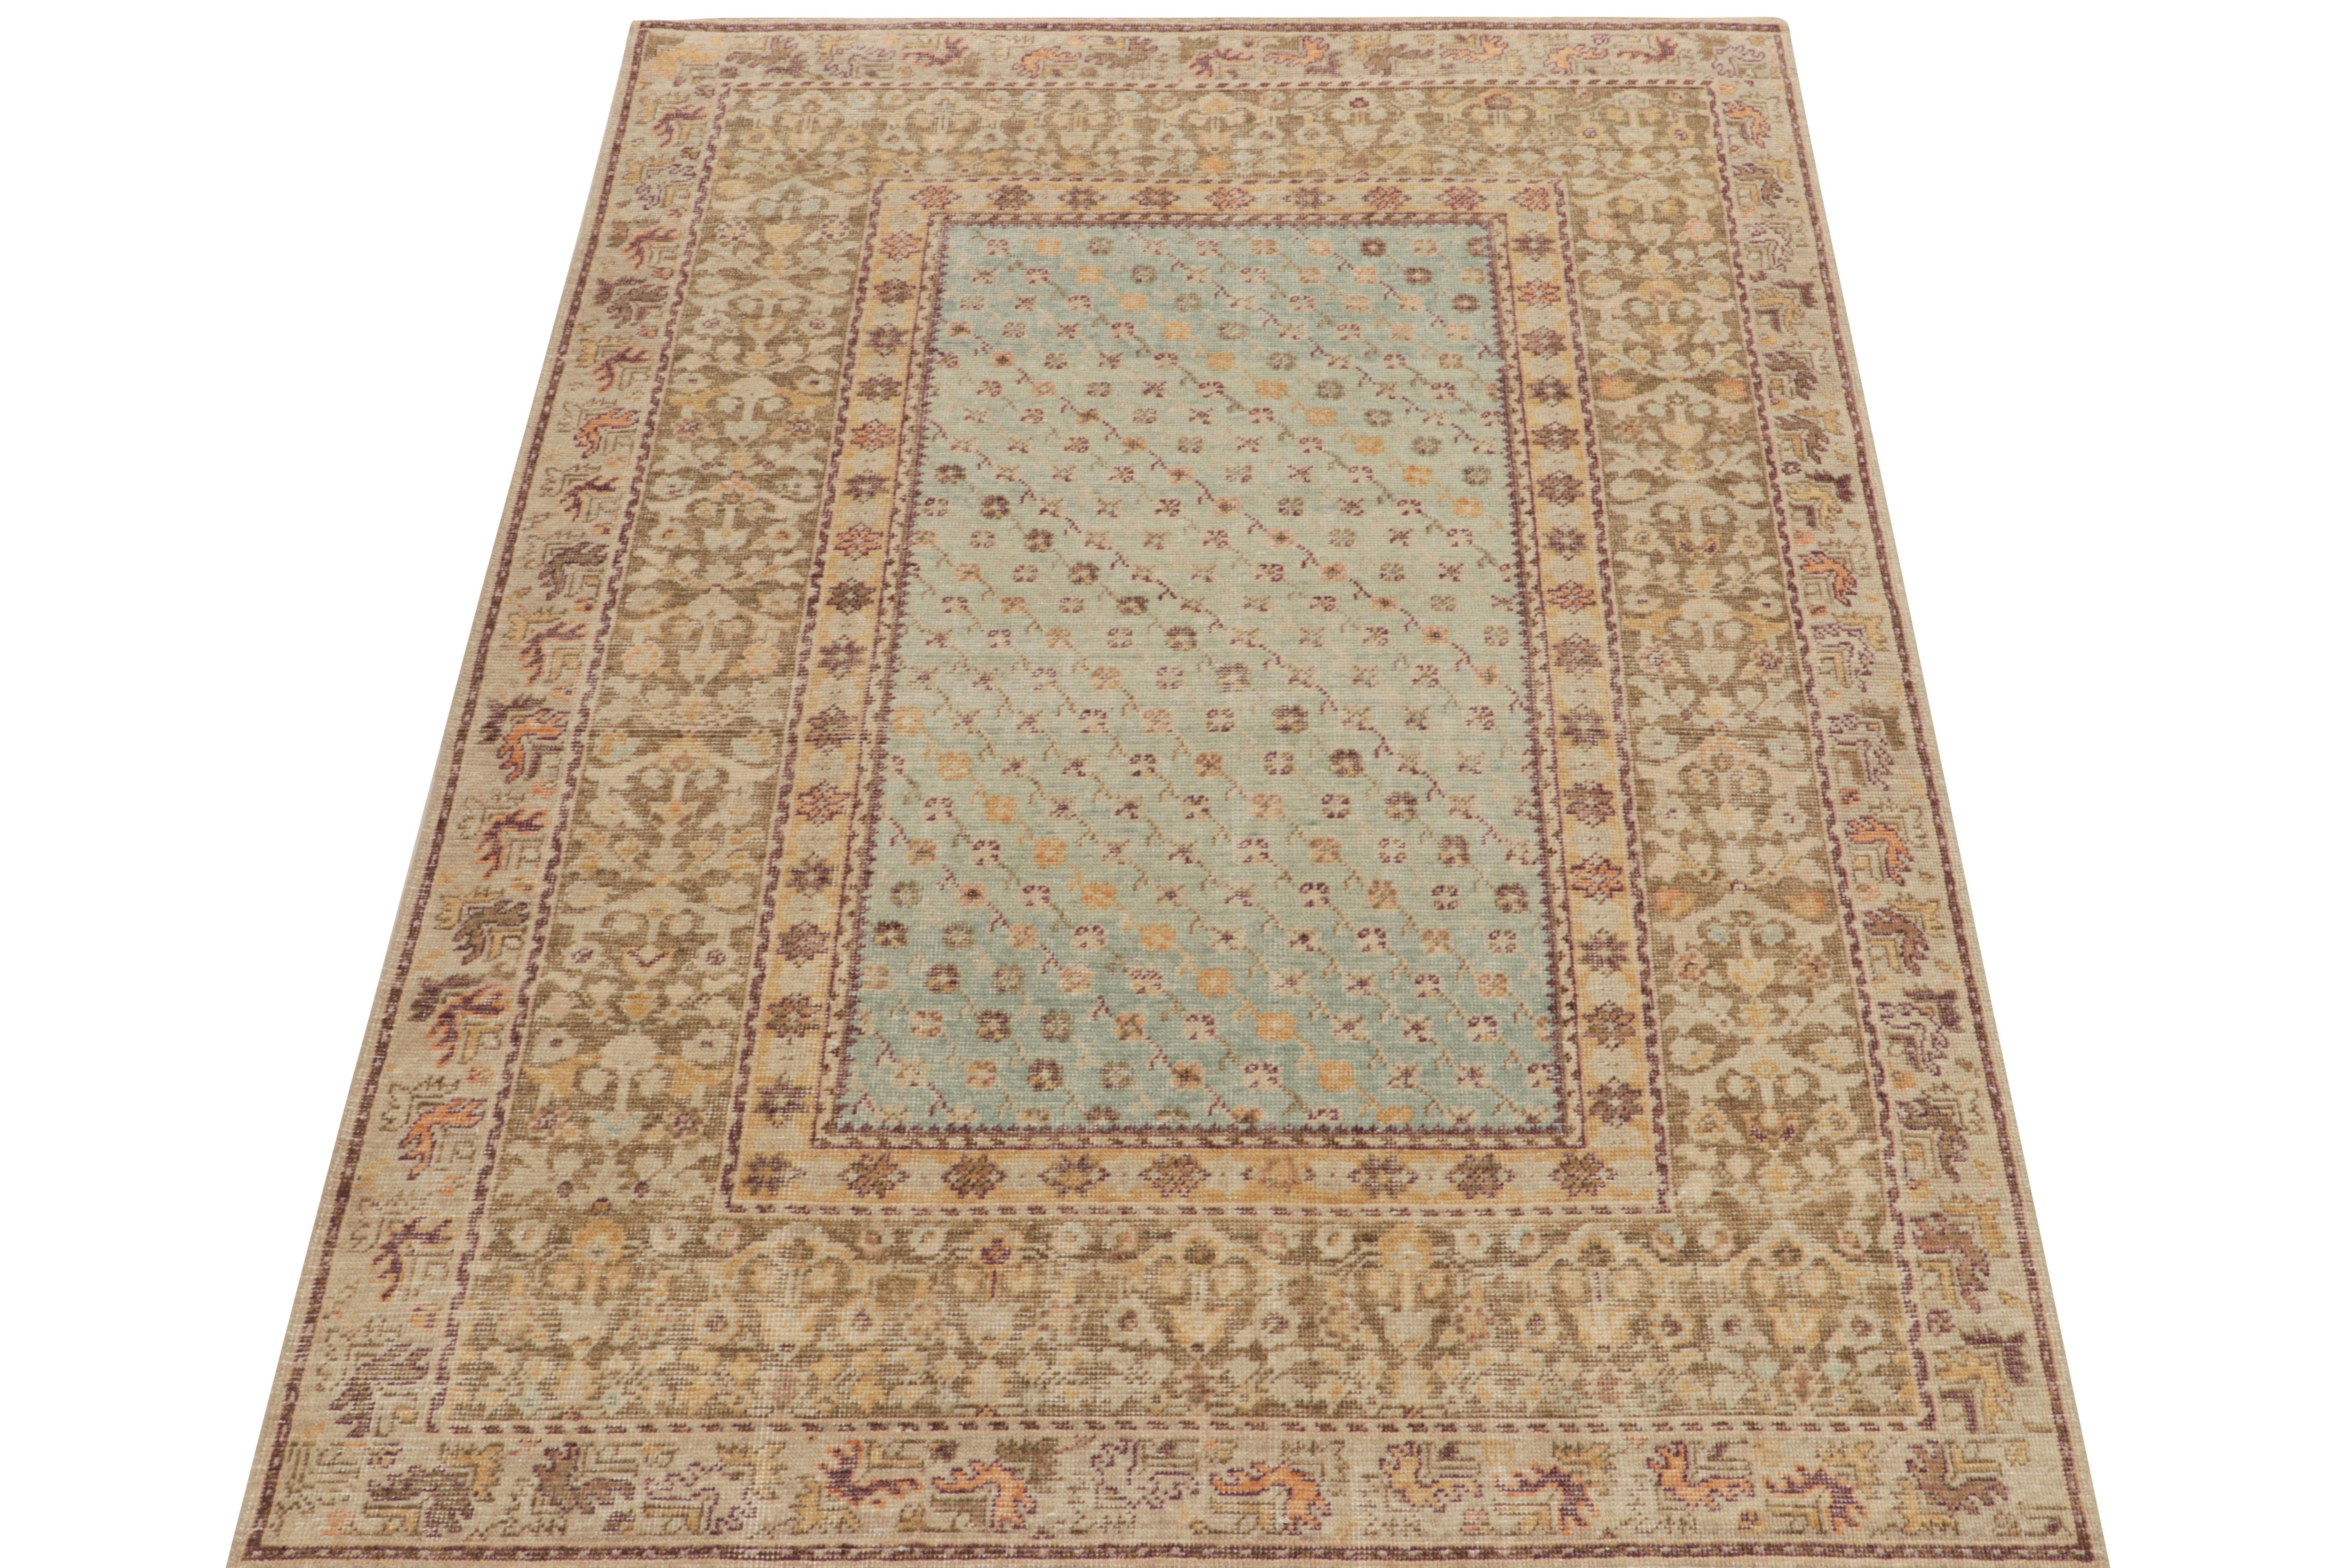 A 6 x 9 distressed style rug from Rug & Kilim’s coveted Homage Collection, enjoying an artful hand-knotted wool in low-pile shabby-chic texture. Inspired by tribal kilim styles, this carpet relishes gentle tones of blue, beige, brown, purple & gold